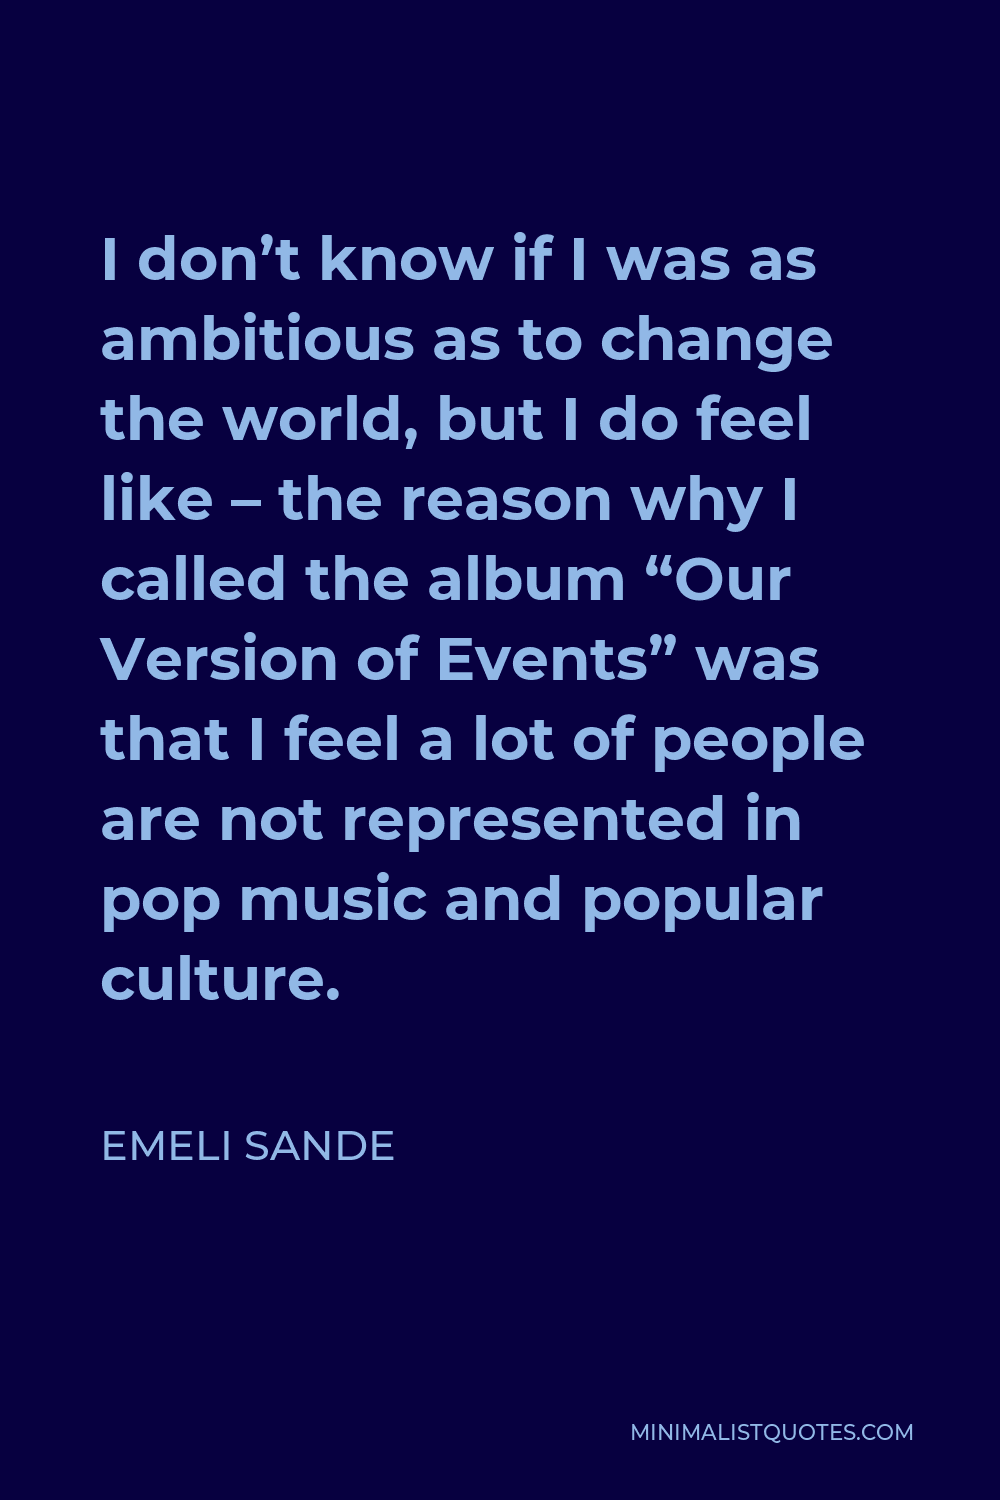 Emeli Sande Quote - I don’t know if I was as ambitious as to change the world, but I do feel like – the reason why I called the album “Our Version of Events” was that I feel a lot of people are not represented in pop music and popular culture.